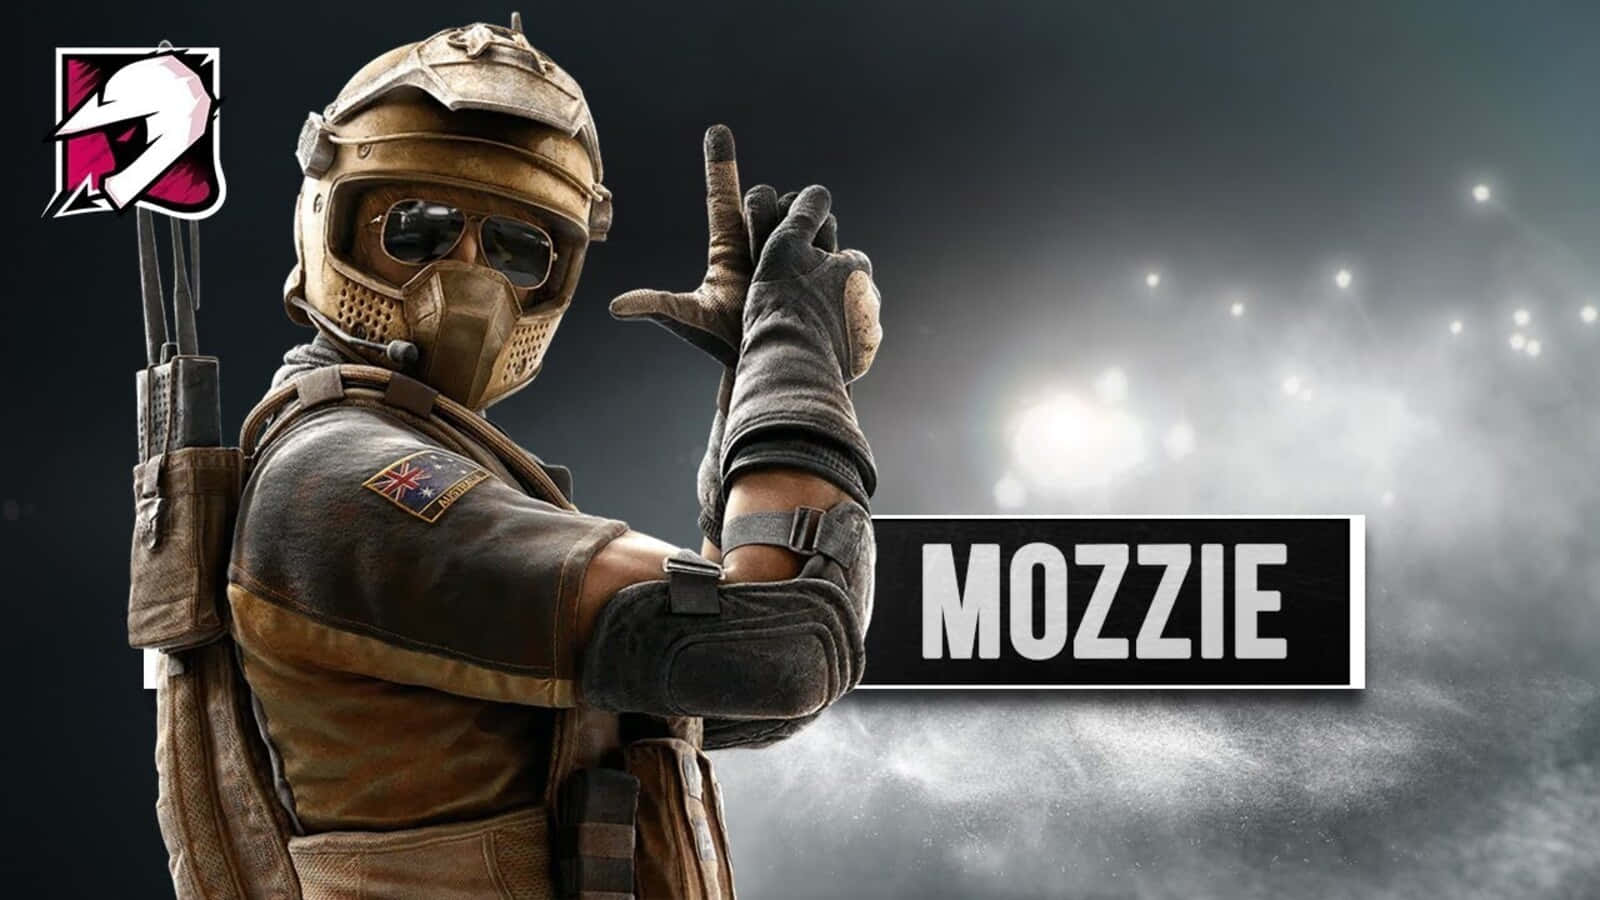 Mozzie from Rainbow Six Siege in Action Wallpaper